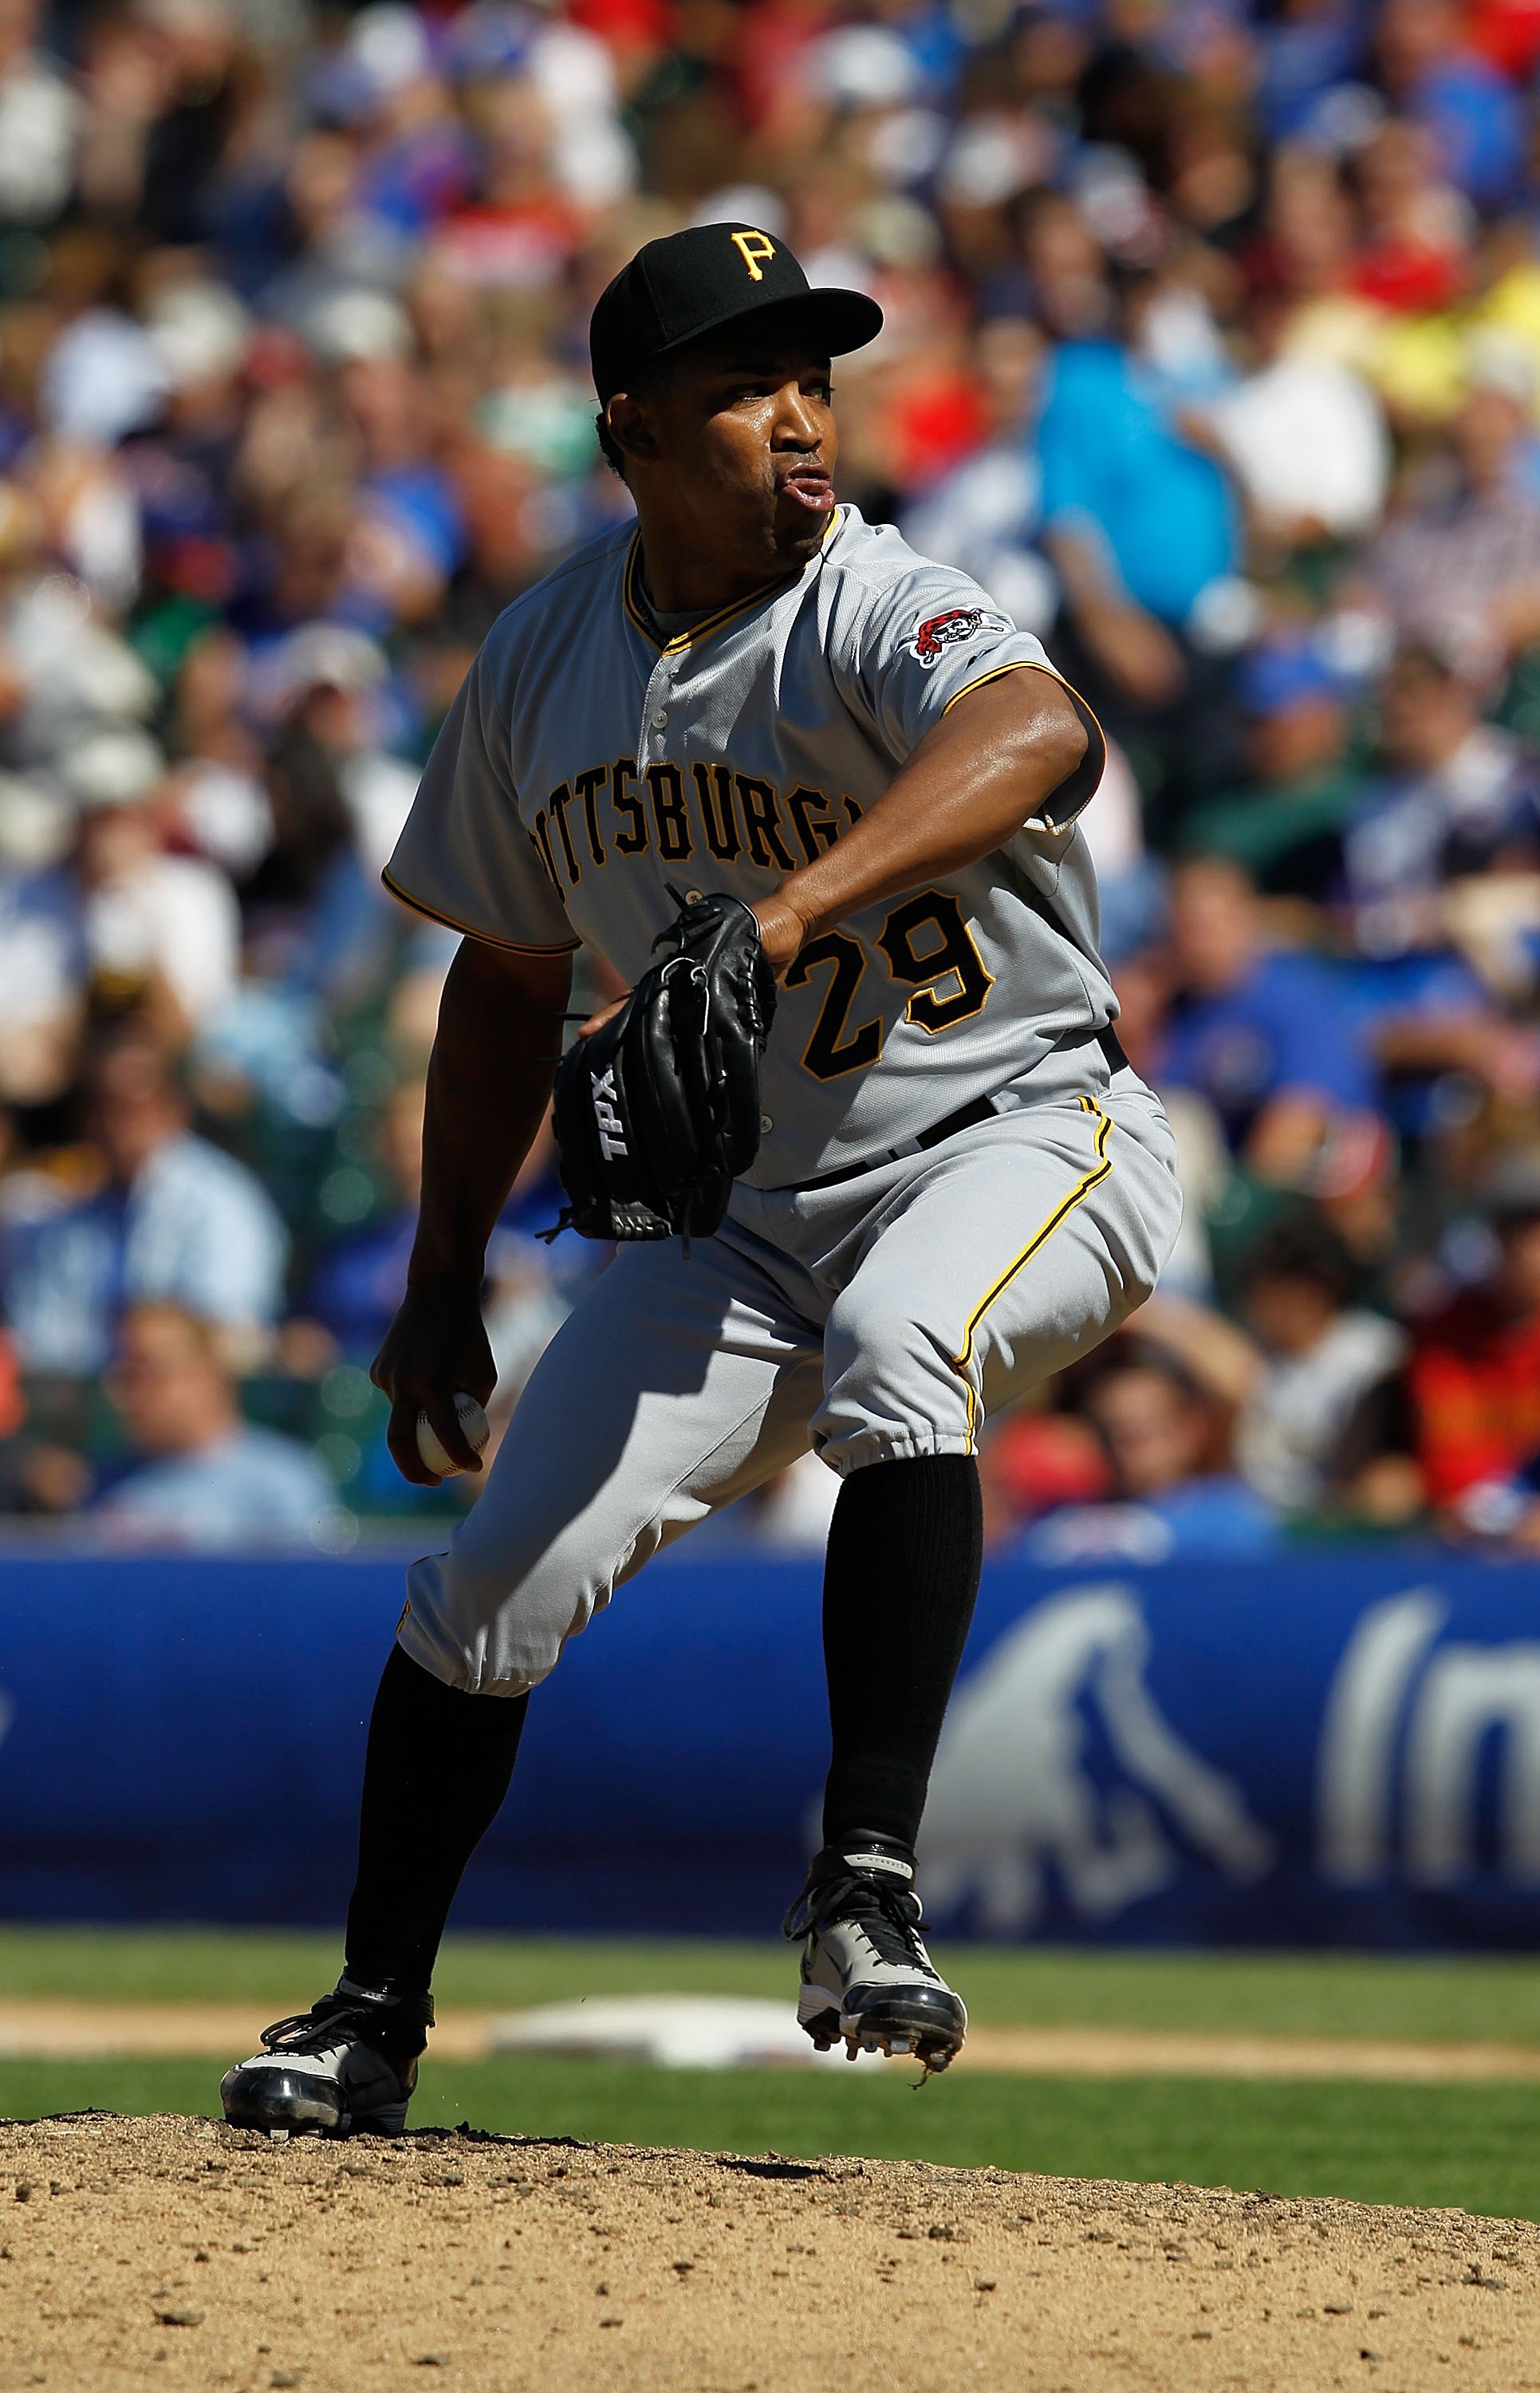 CHICAGO - JUNE 30: Octavio Dotel #29 of the Pittsburgh Pirates pitches in the 9th inning on his way to a save against the Chicago Cubs at Wrigley Field on June 30, 2010 in Chicago, Illinois. The Pirates defeated the Cubs 2-0. (Photo by Jonathan Daniel/Get